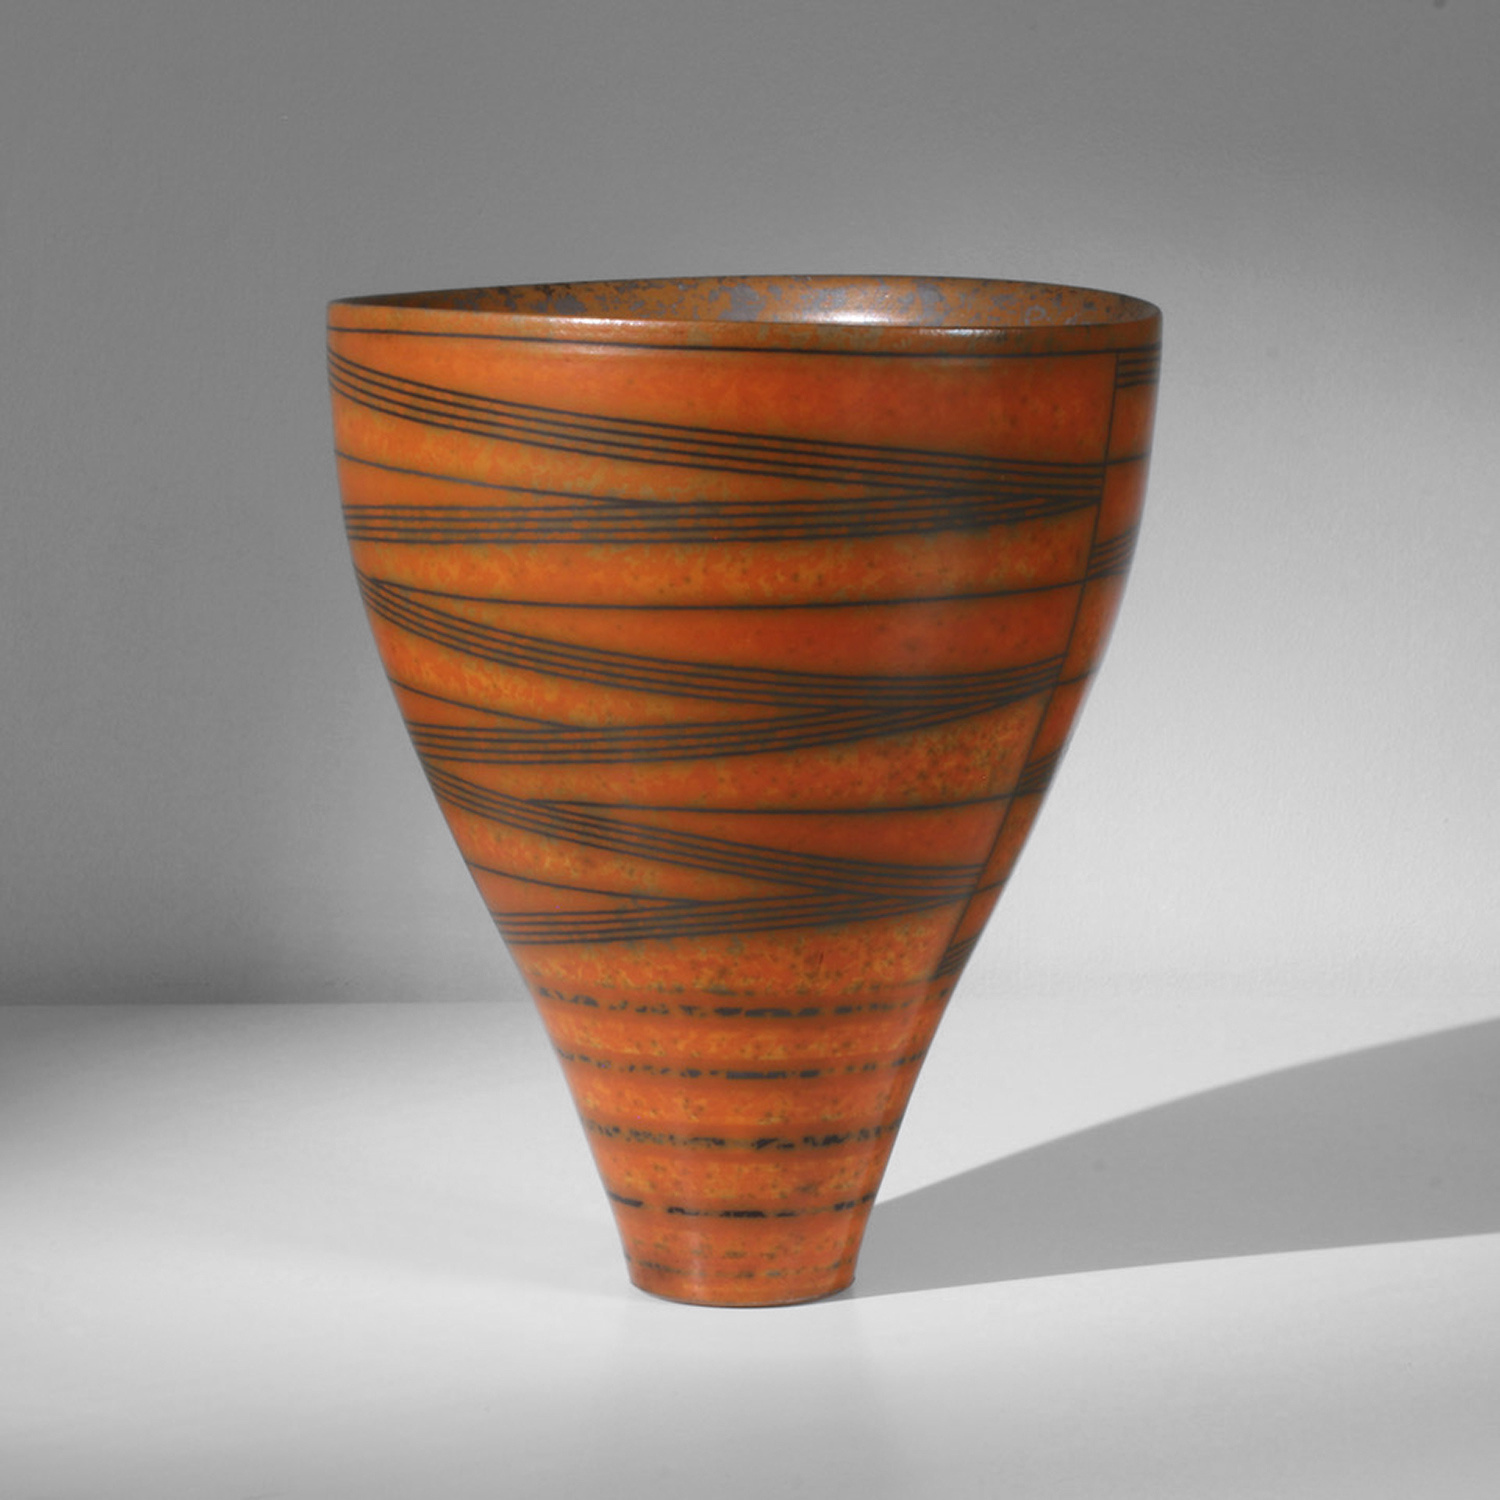 Form with Oval Rim by Duncan Ross